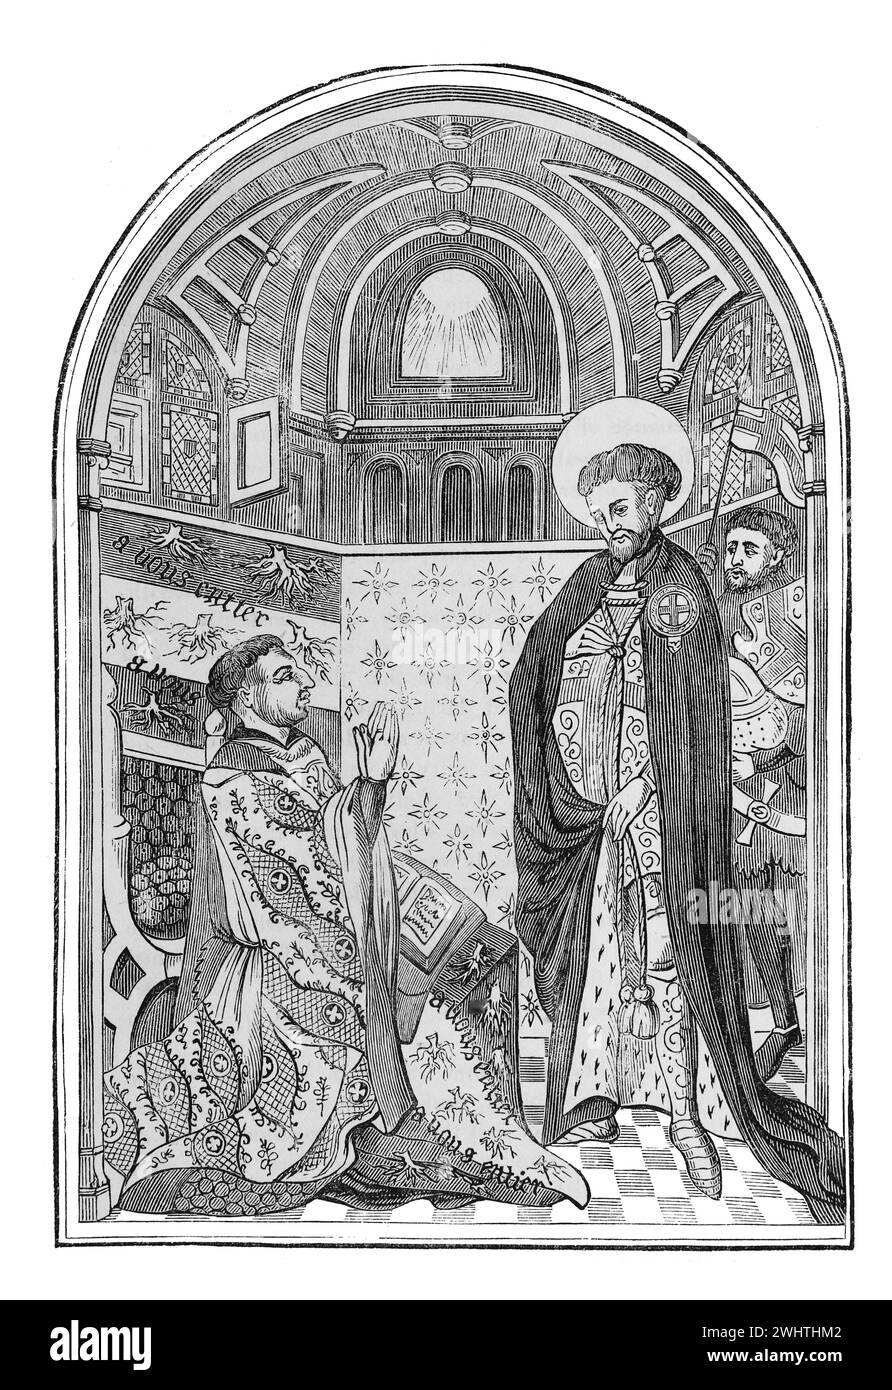 The Duke of Bedford and St George from the Bedford Missal. Black and White Illustration from the 'Old England' published by James Sangster in 1860. Stock Photo